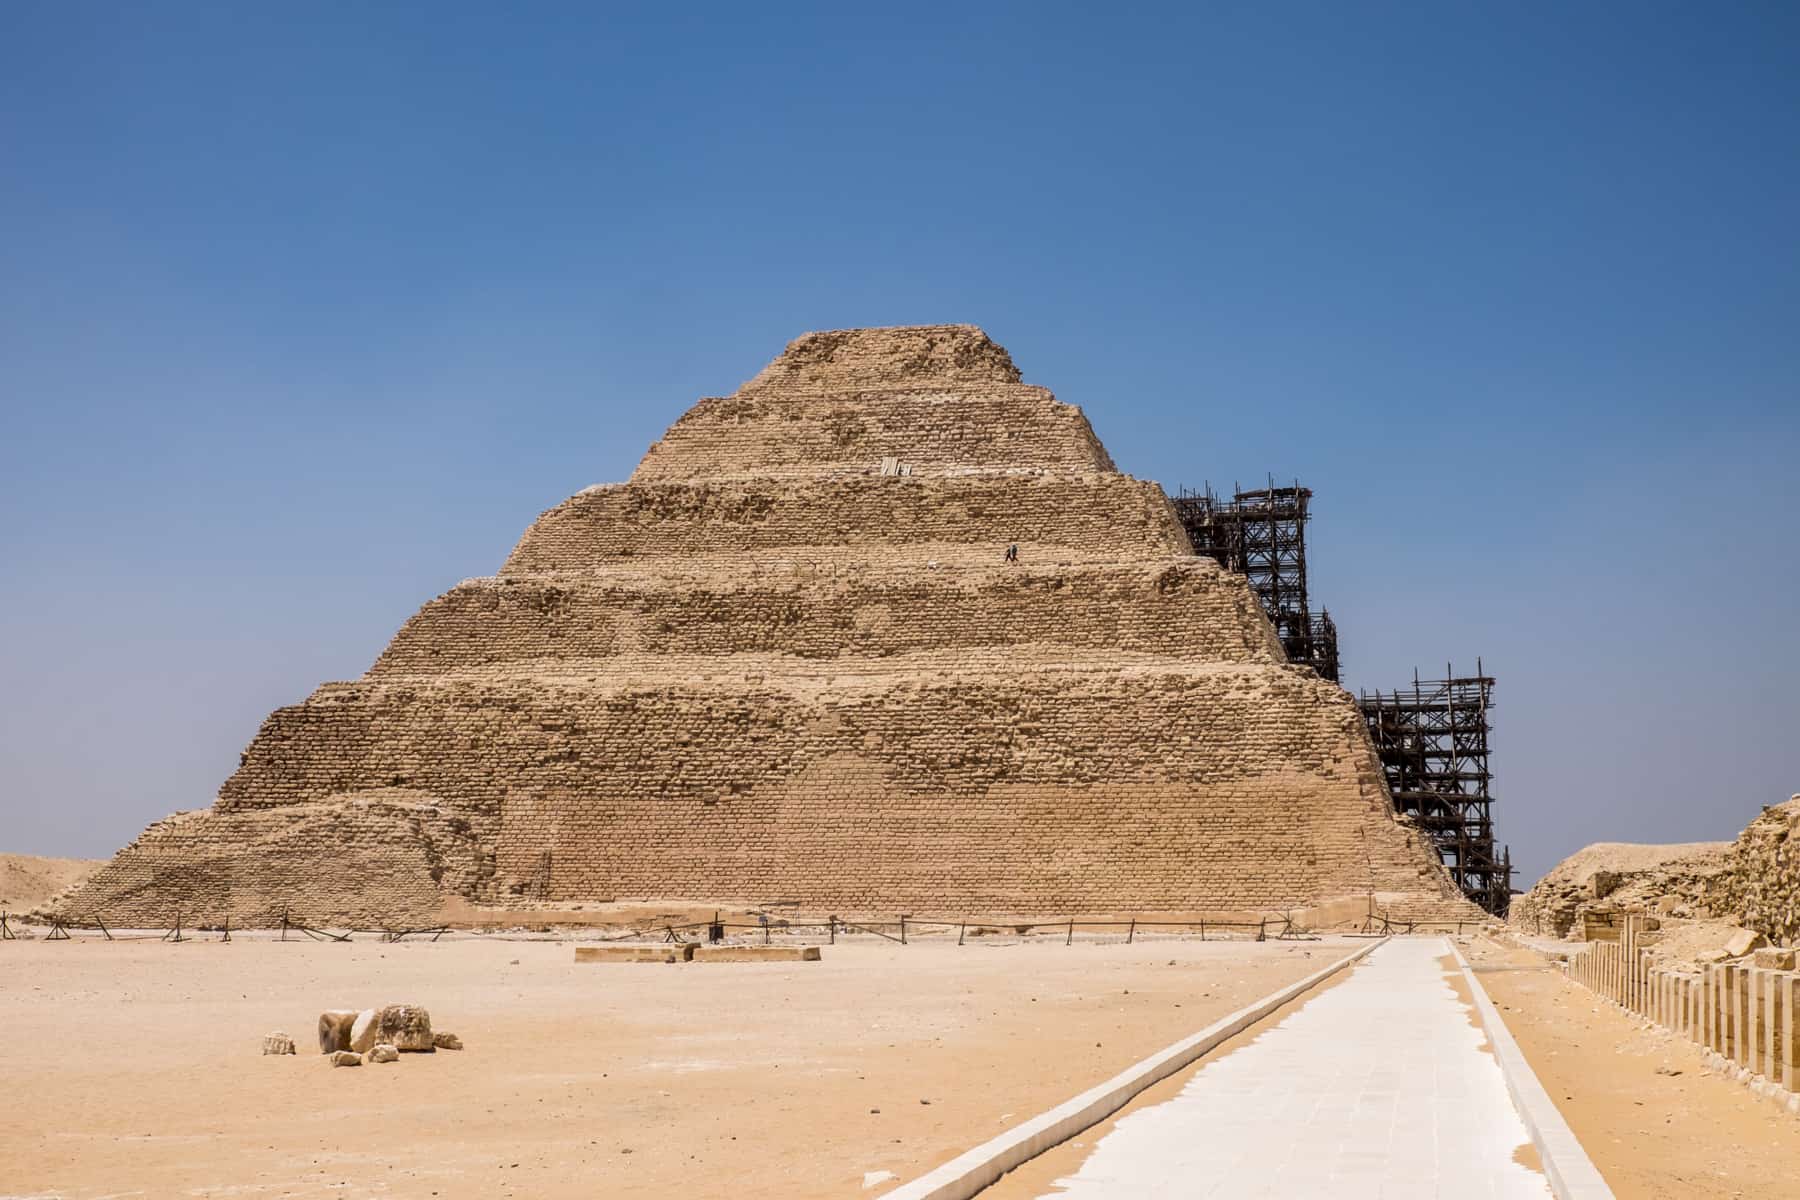 The famous step pyramid of Saqqara in Egypt, showcasing a different type of pyramid design